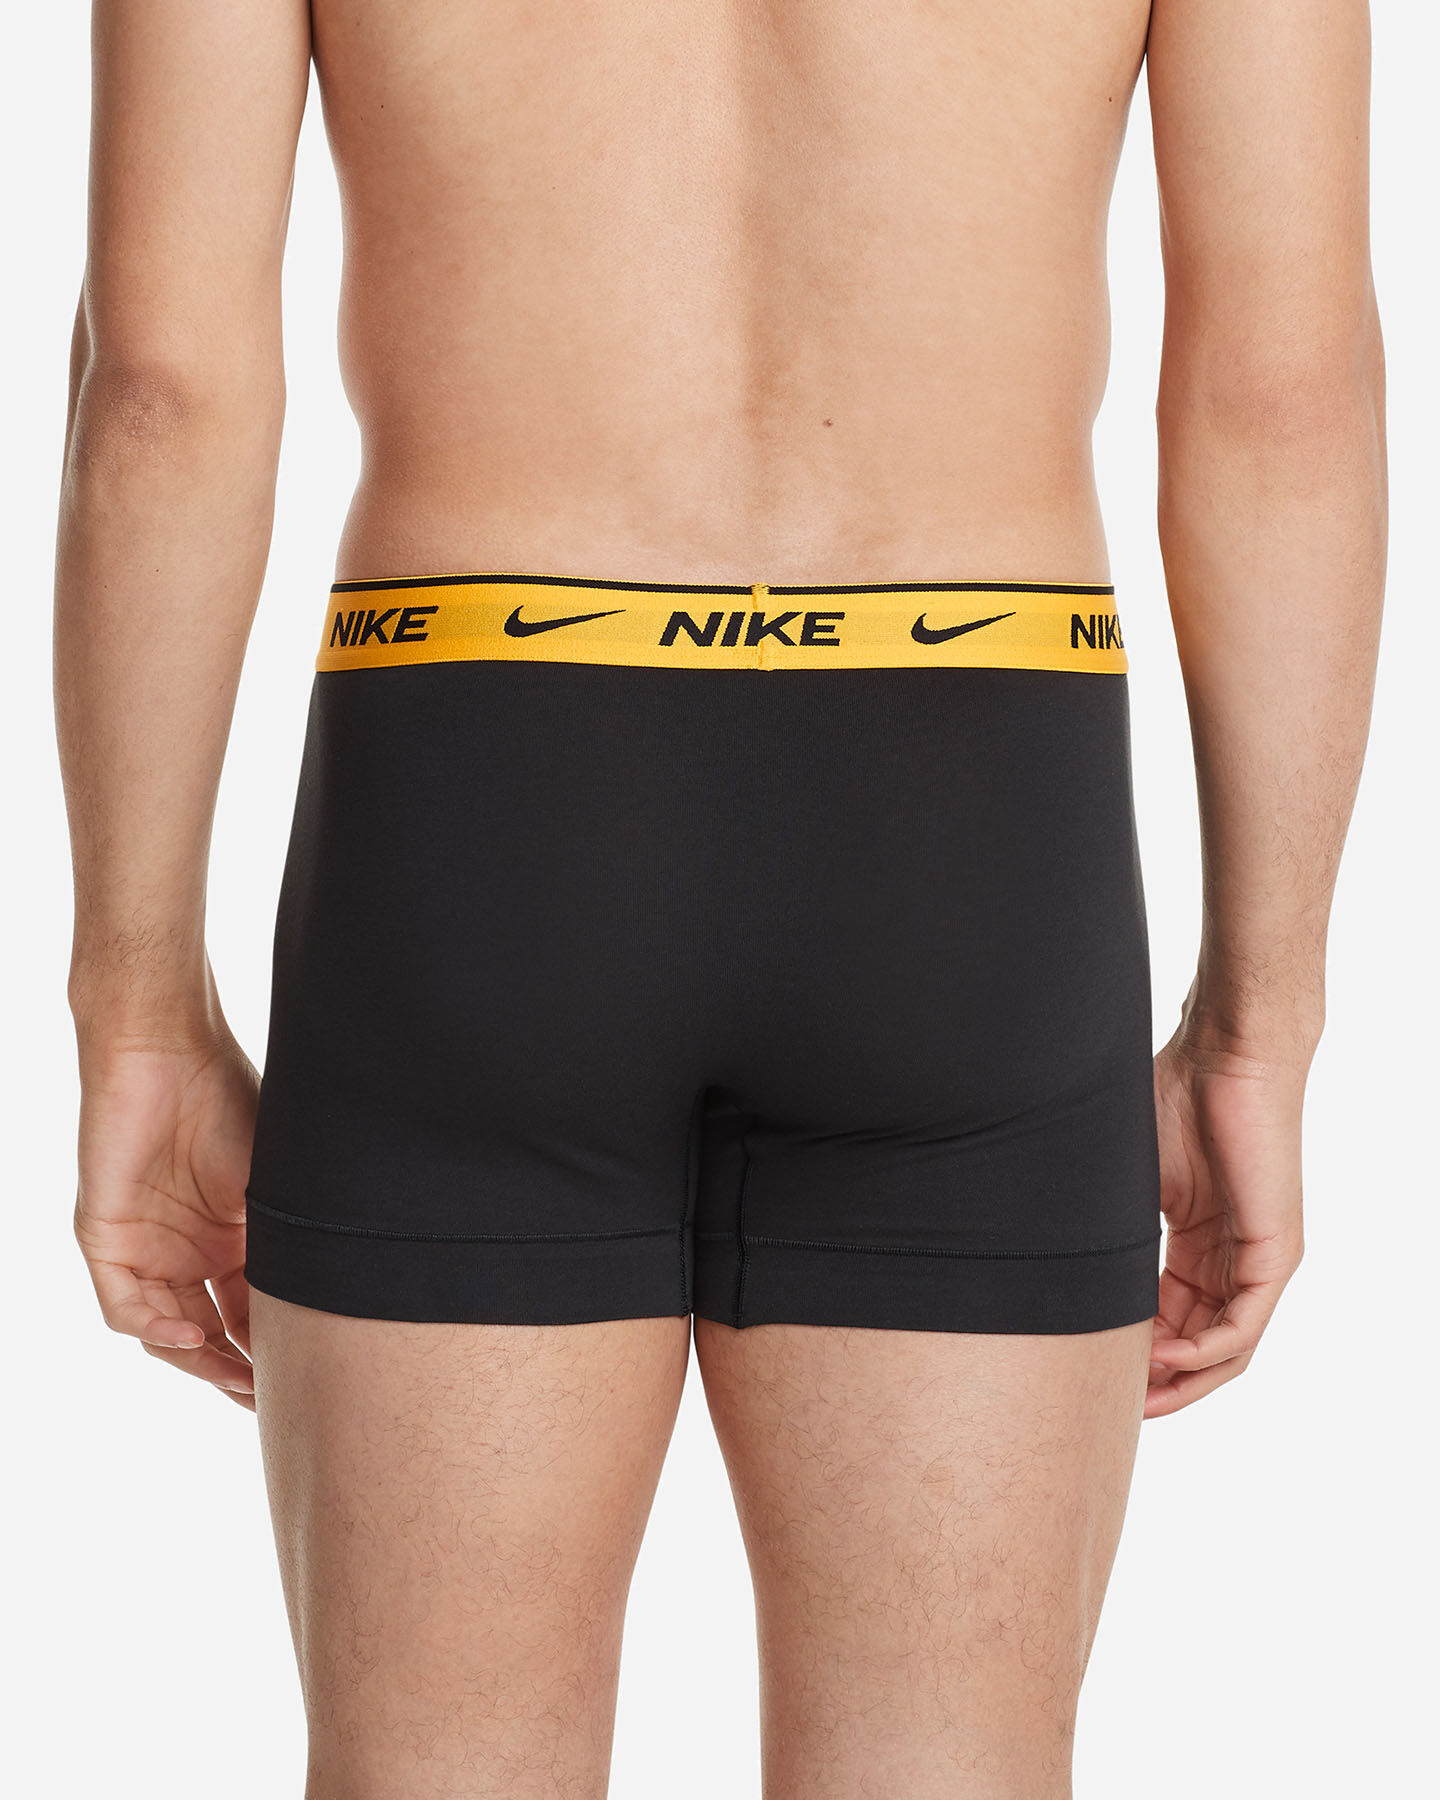  Intimo NIKE 3PACK BOXER EVERYDAY M S4099884|M1R|S scatto 3